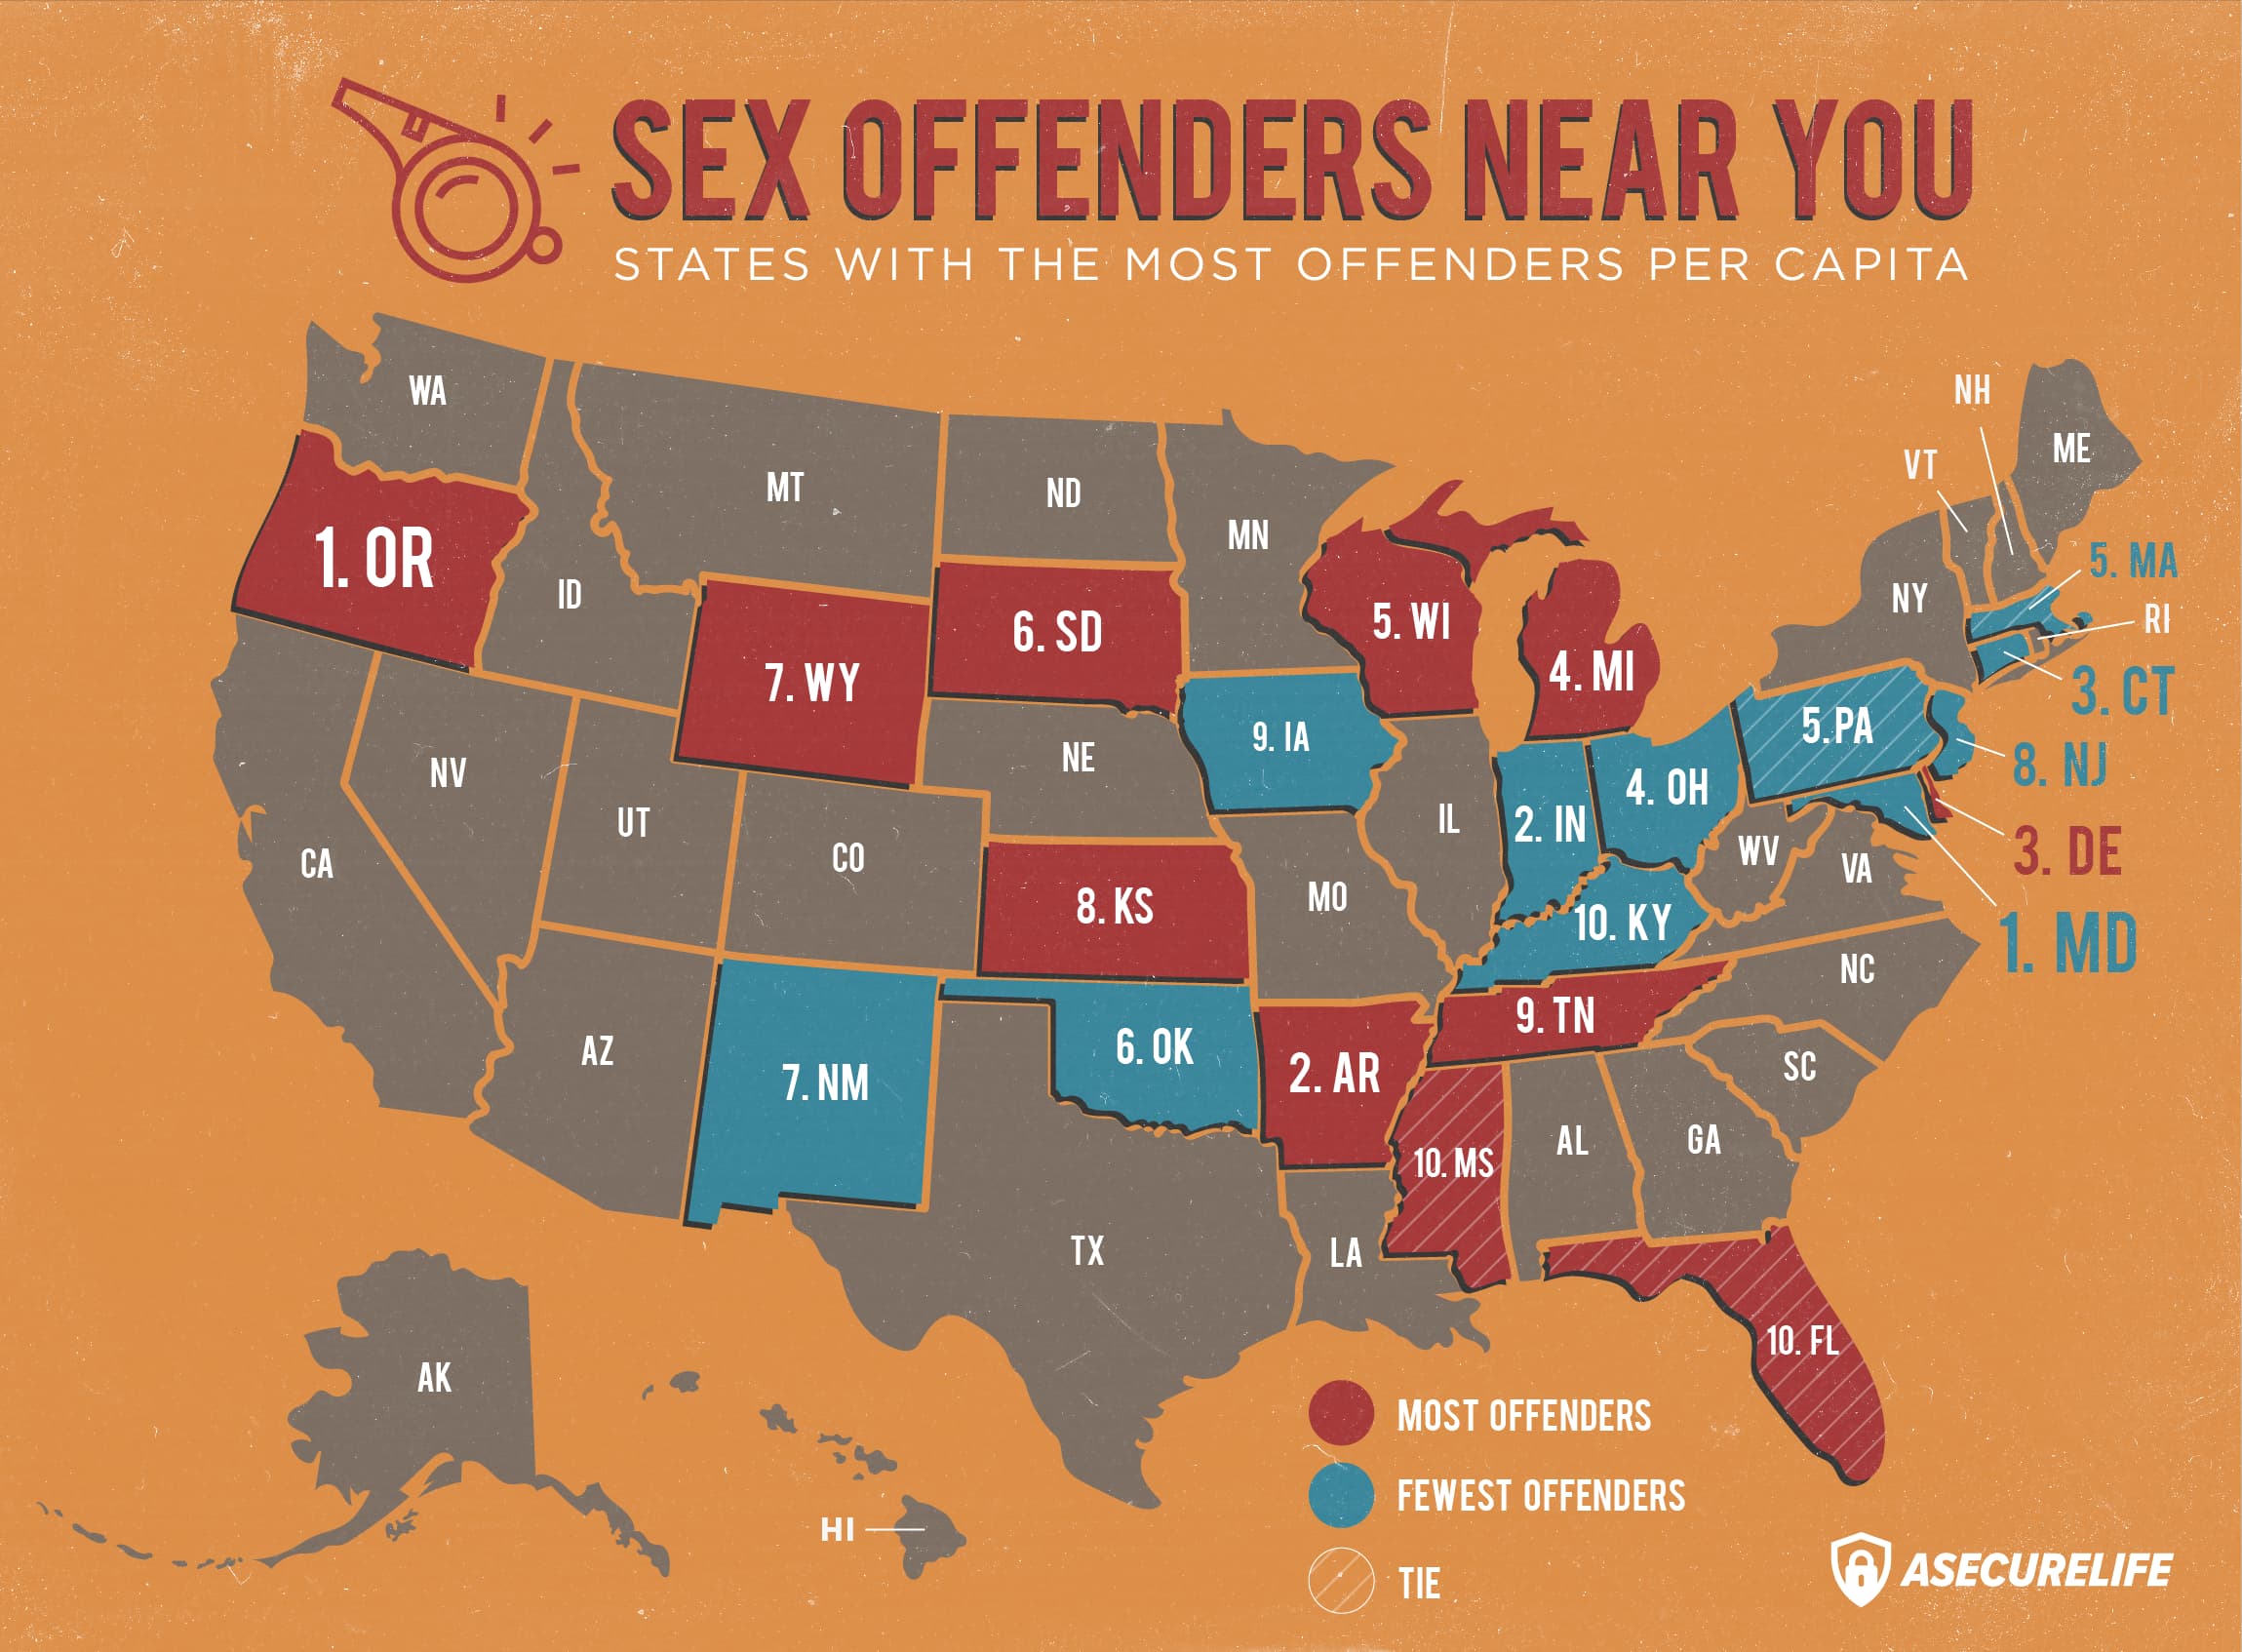 Sex Offenders Near You: Stats and Resources for 2020